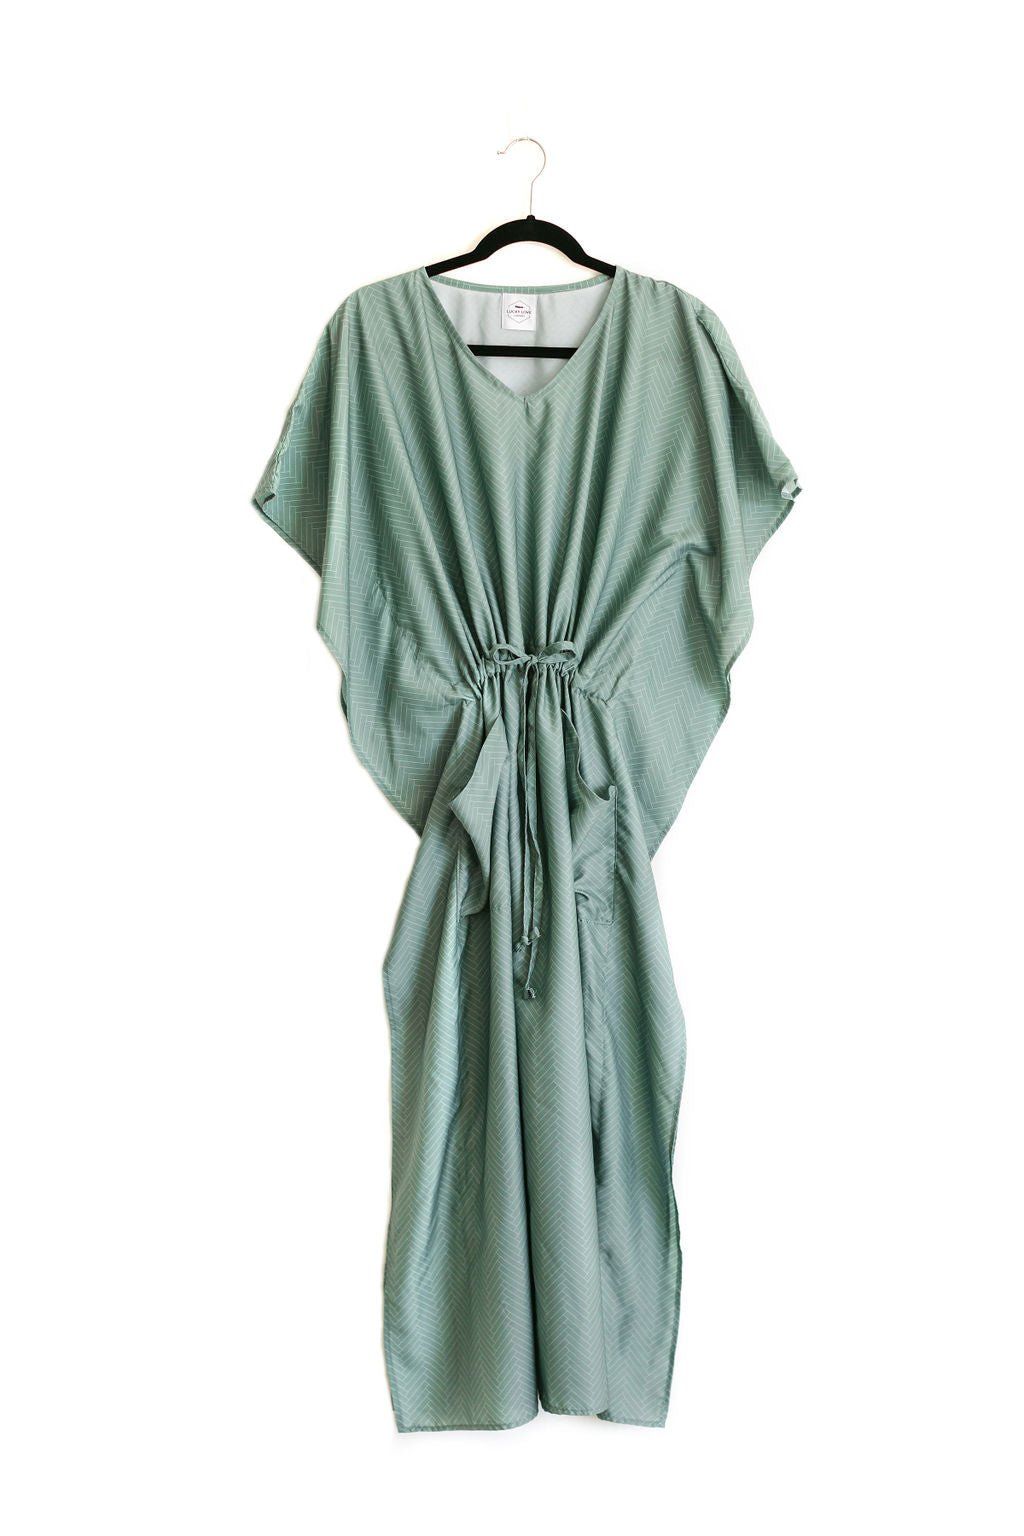 JADE House Dress / Lightweight Soft Synthetic Silk / Effortless and Easy